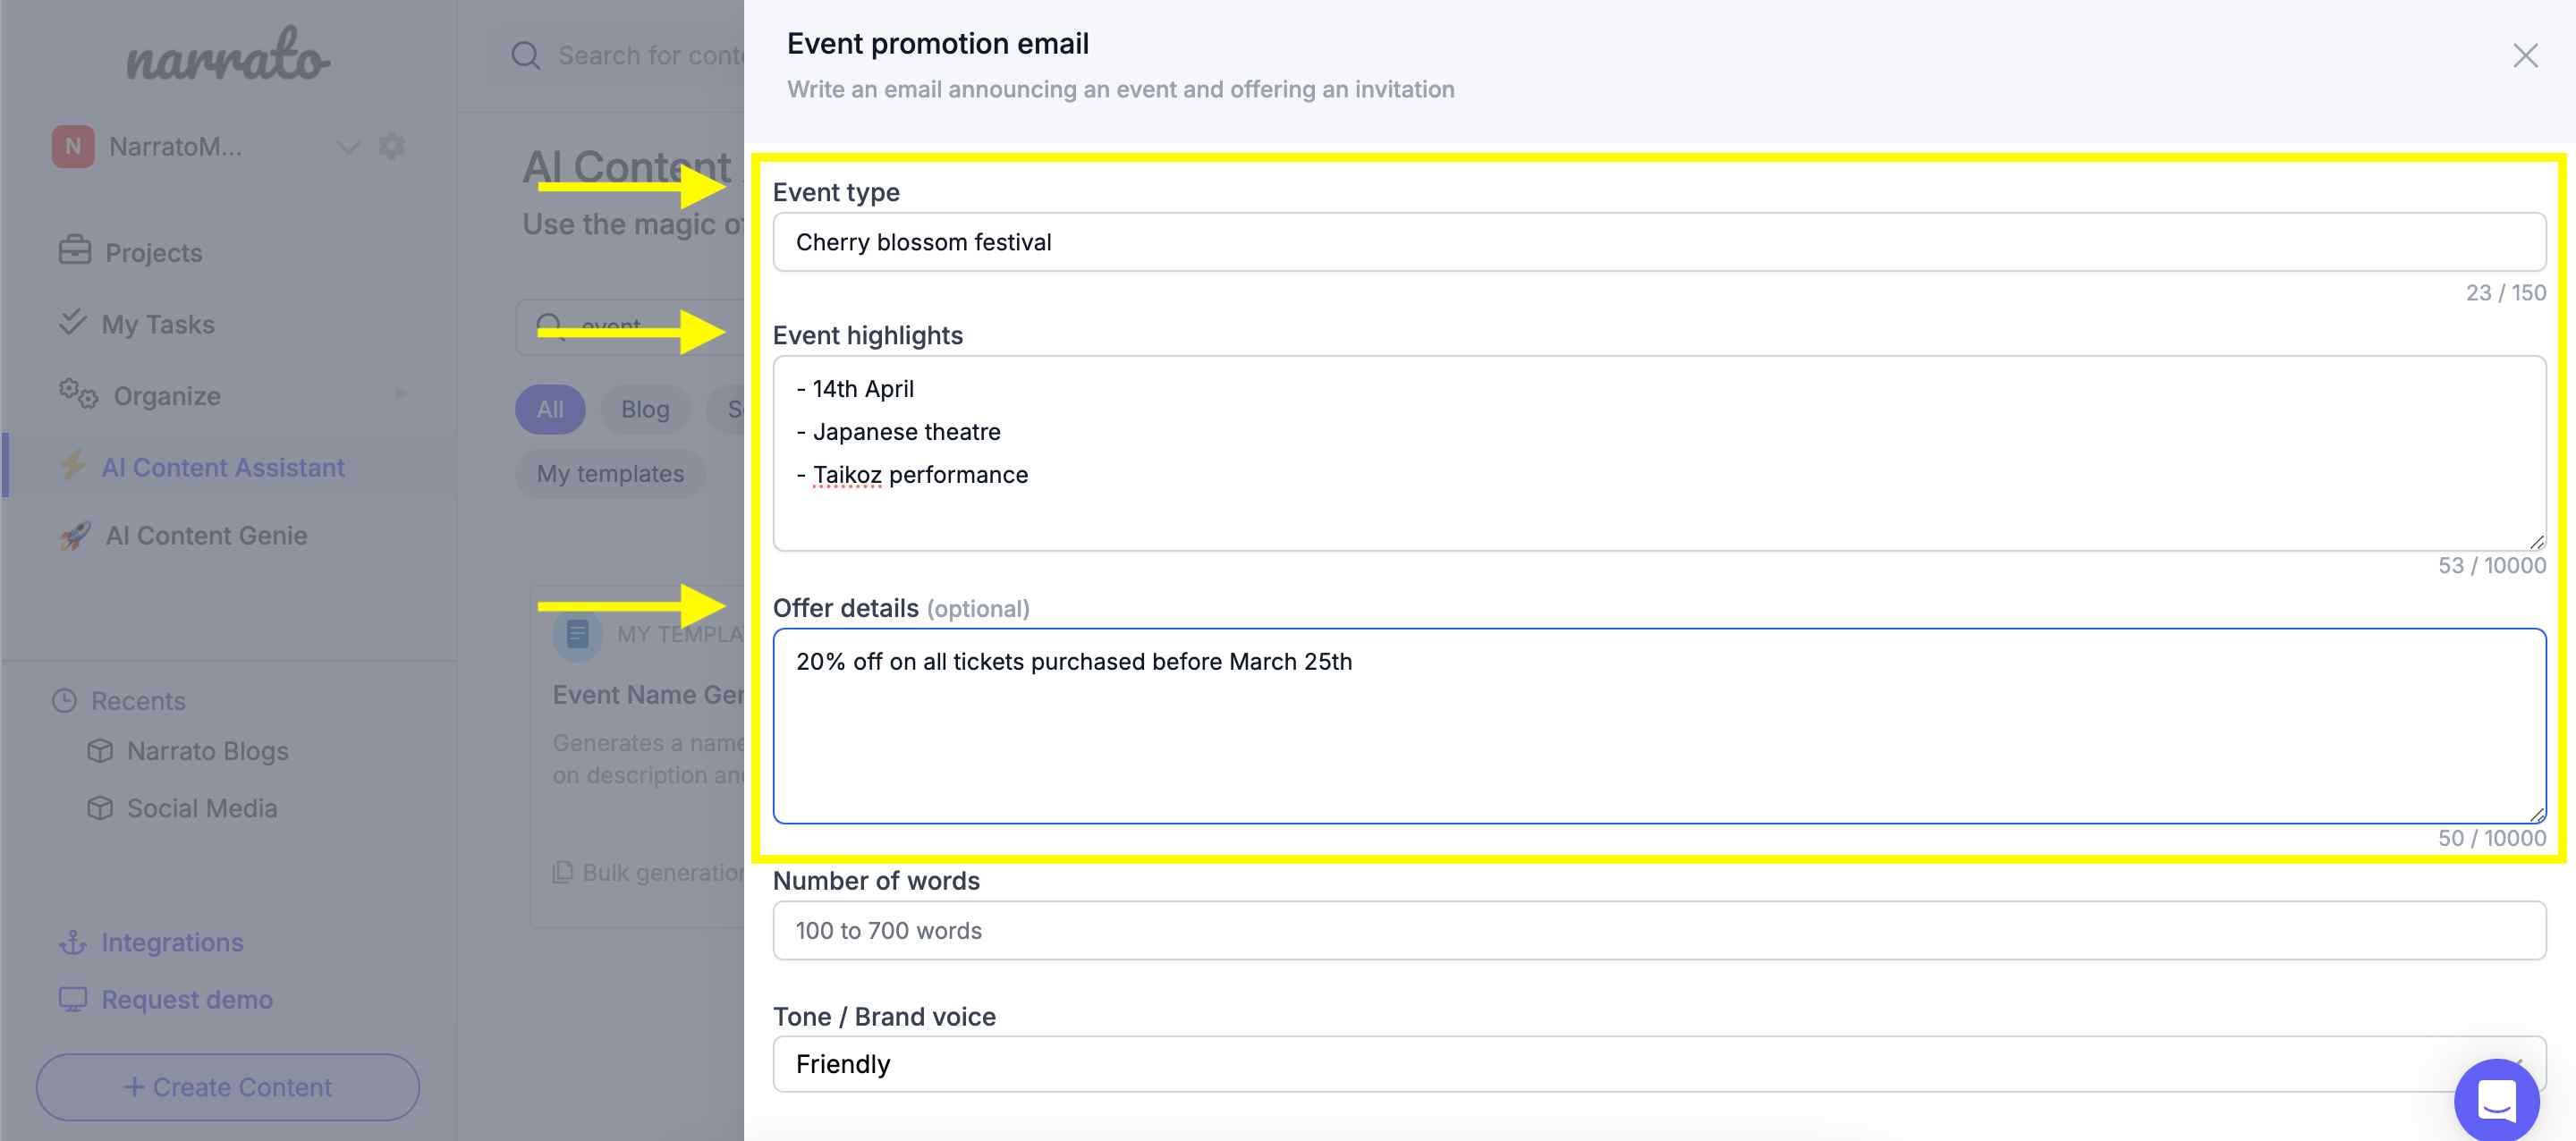 Adding event details in the event promotion email generator